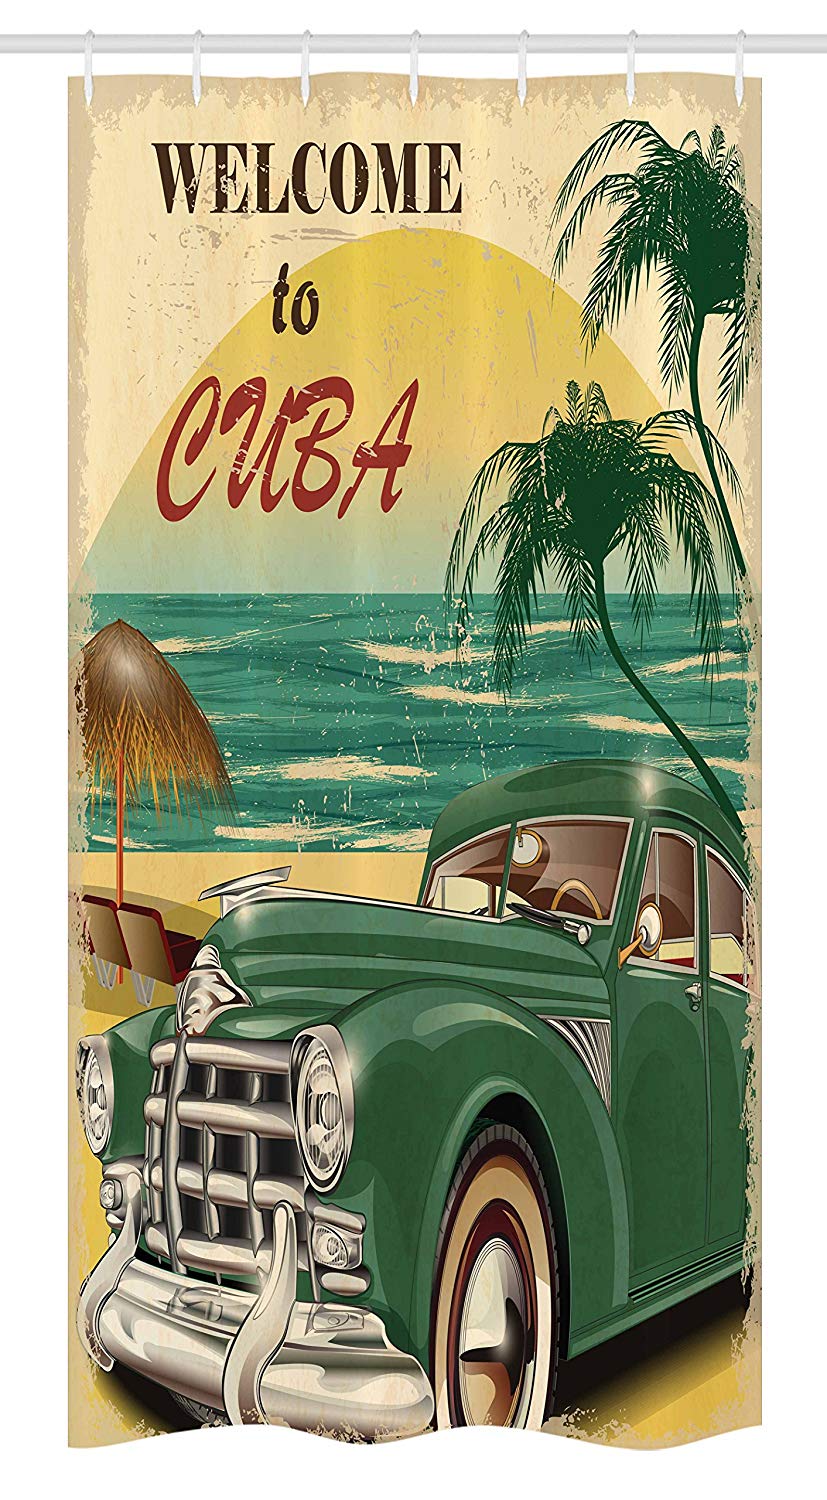 Ambesonne Retro Stall Shower Curtain, Nostalgic Welcome to Cuba Artsy Print with Classic Car Beach Ocean Palm Trees, Fabric Bathroom Decor Set with Hooks, 36 W x 72 L inches, Green Cream Yellow